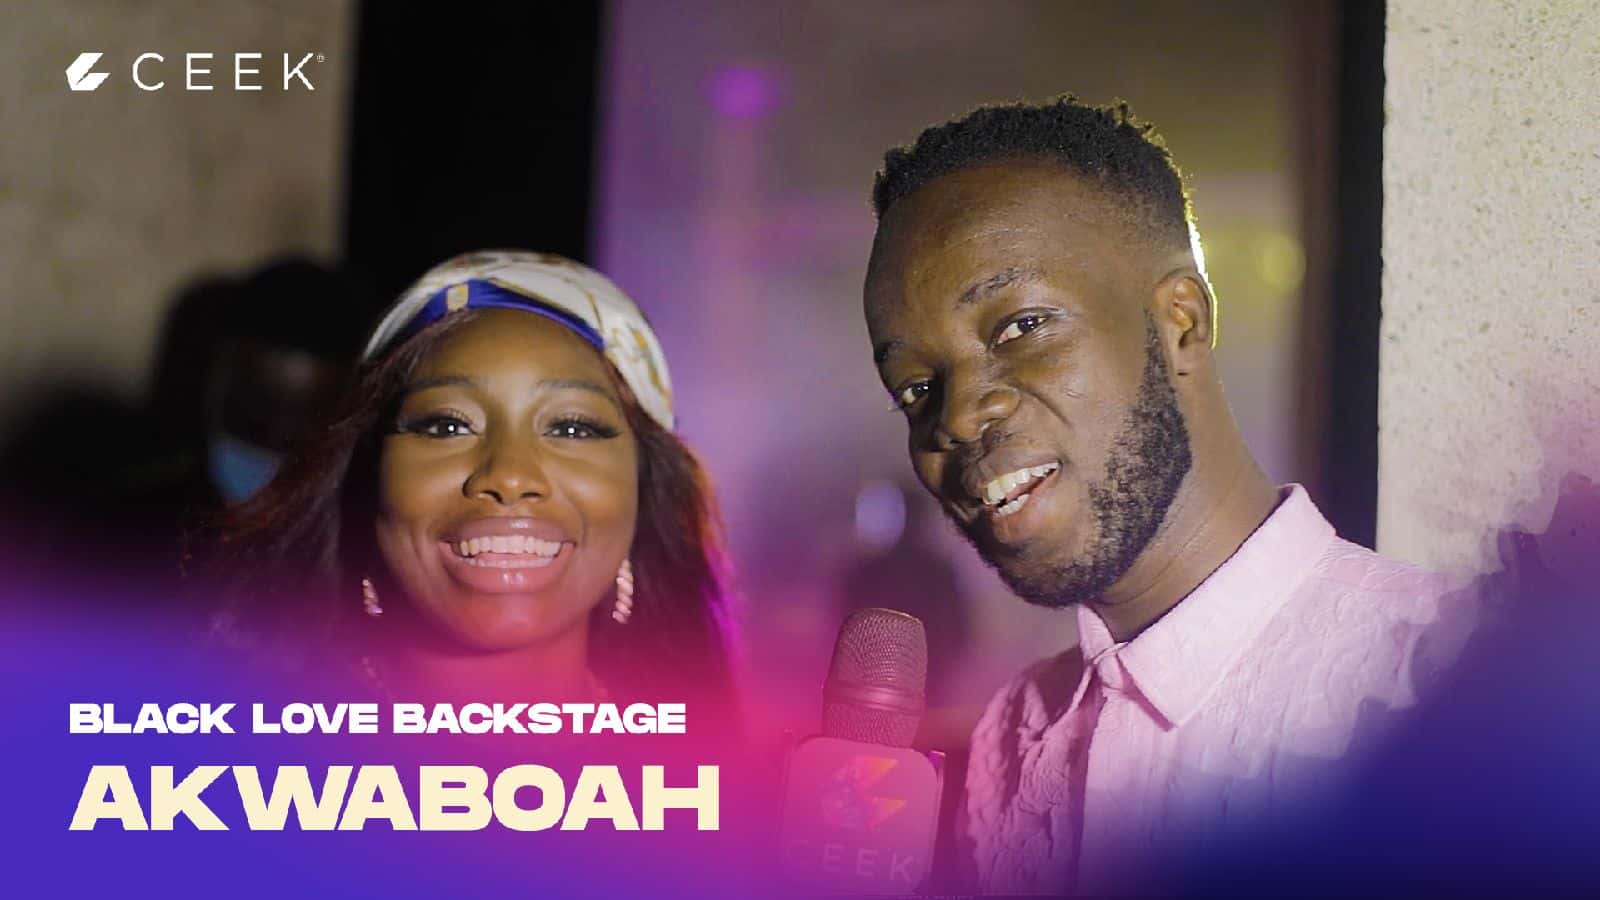 Backstage with Akwaboah